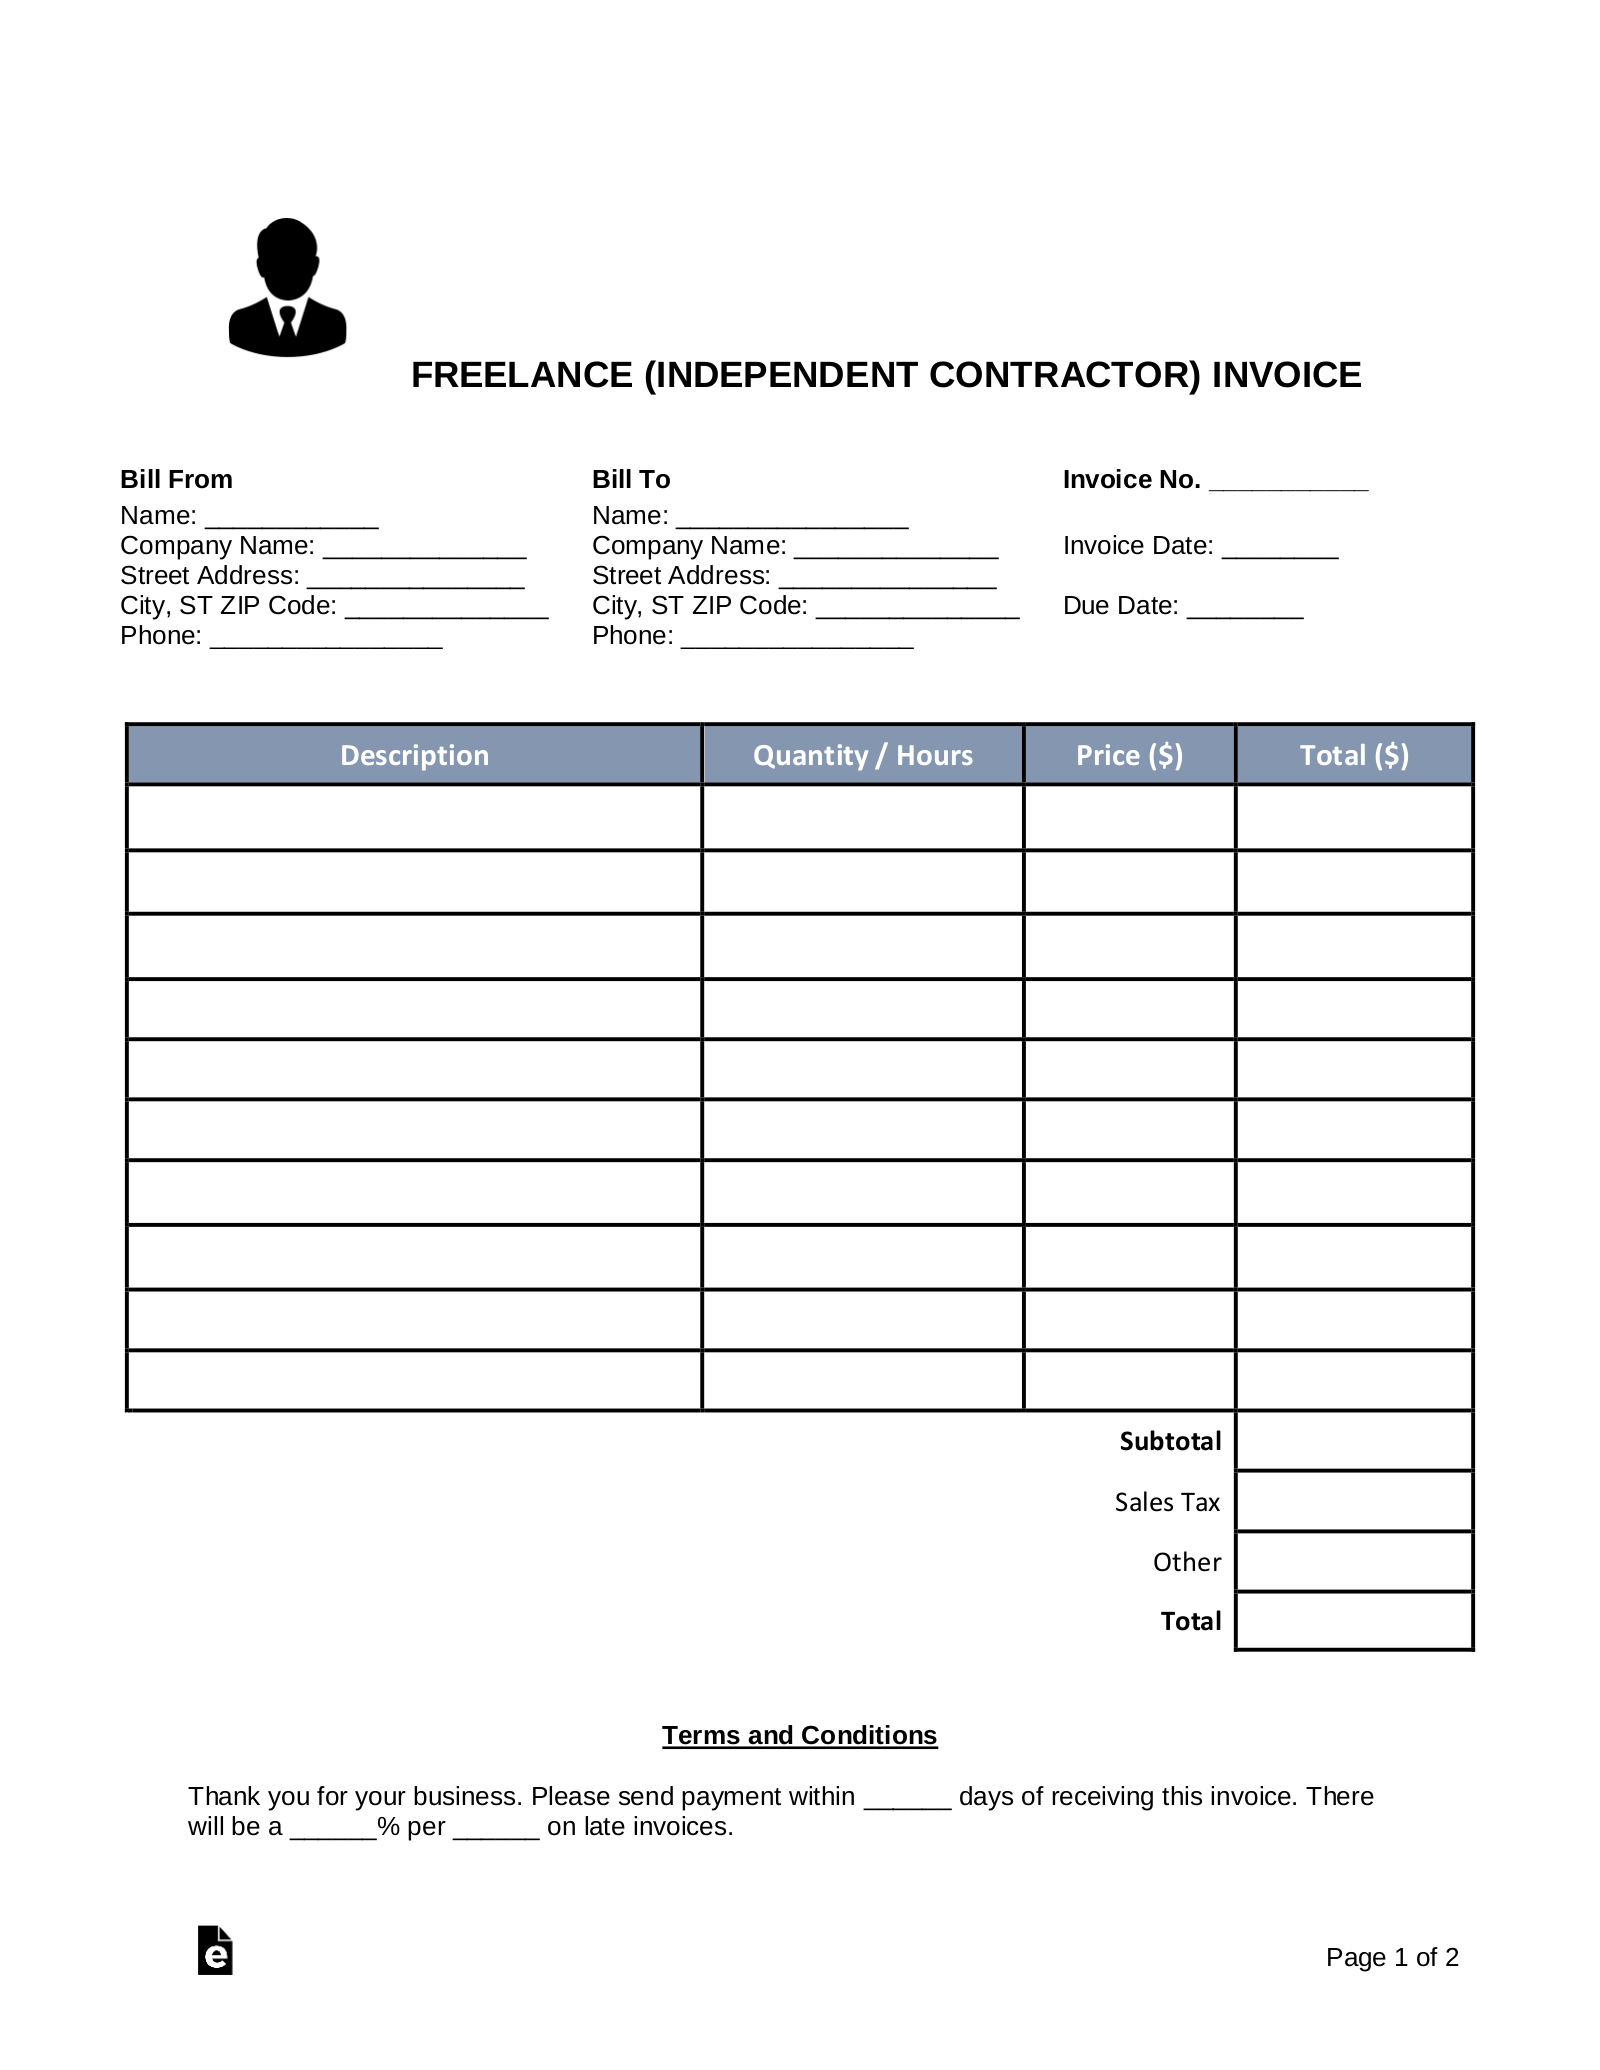 Free Freelance Independent Contractor Invoice Template Word Pdf Eforms